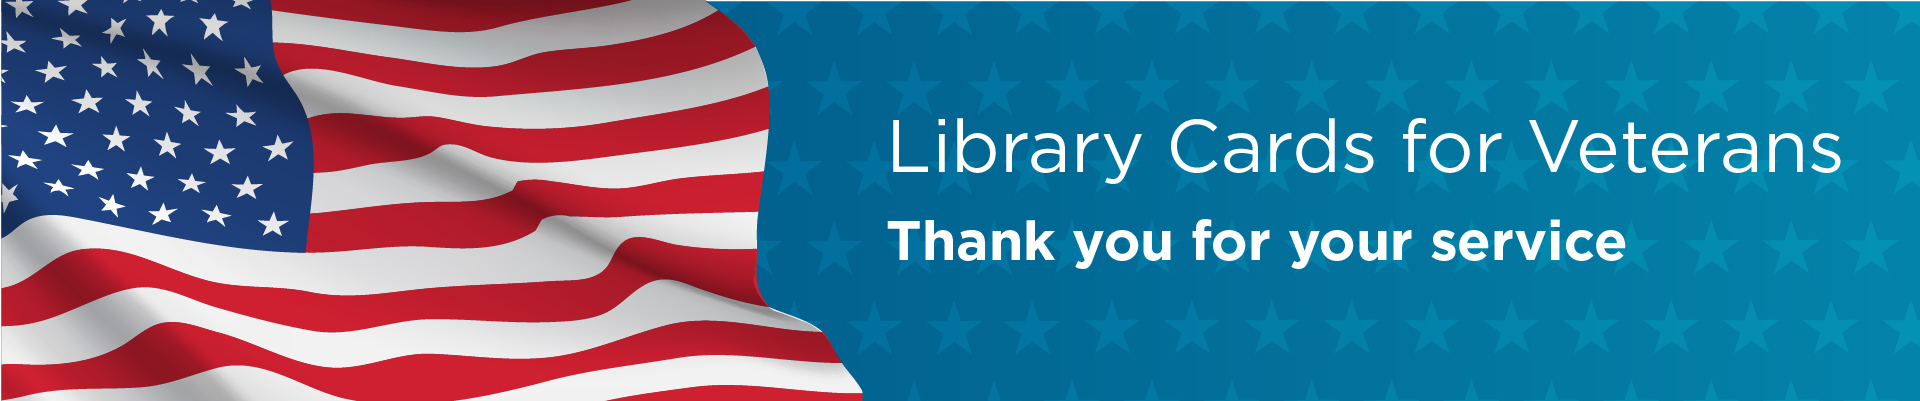 Library Cards for Veterans Thank You for Your Service